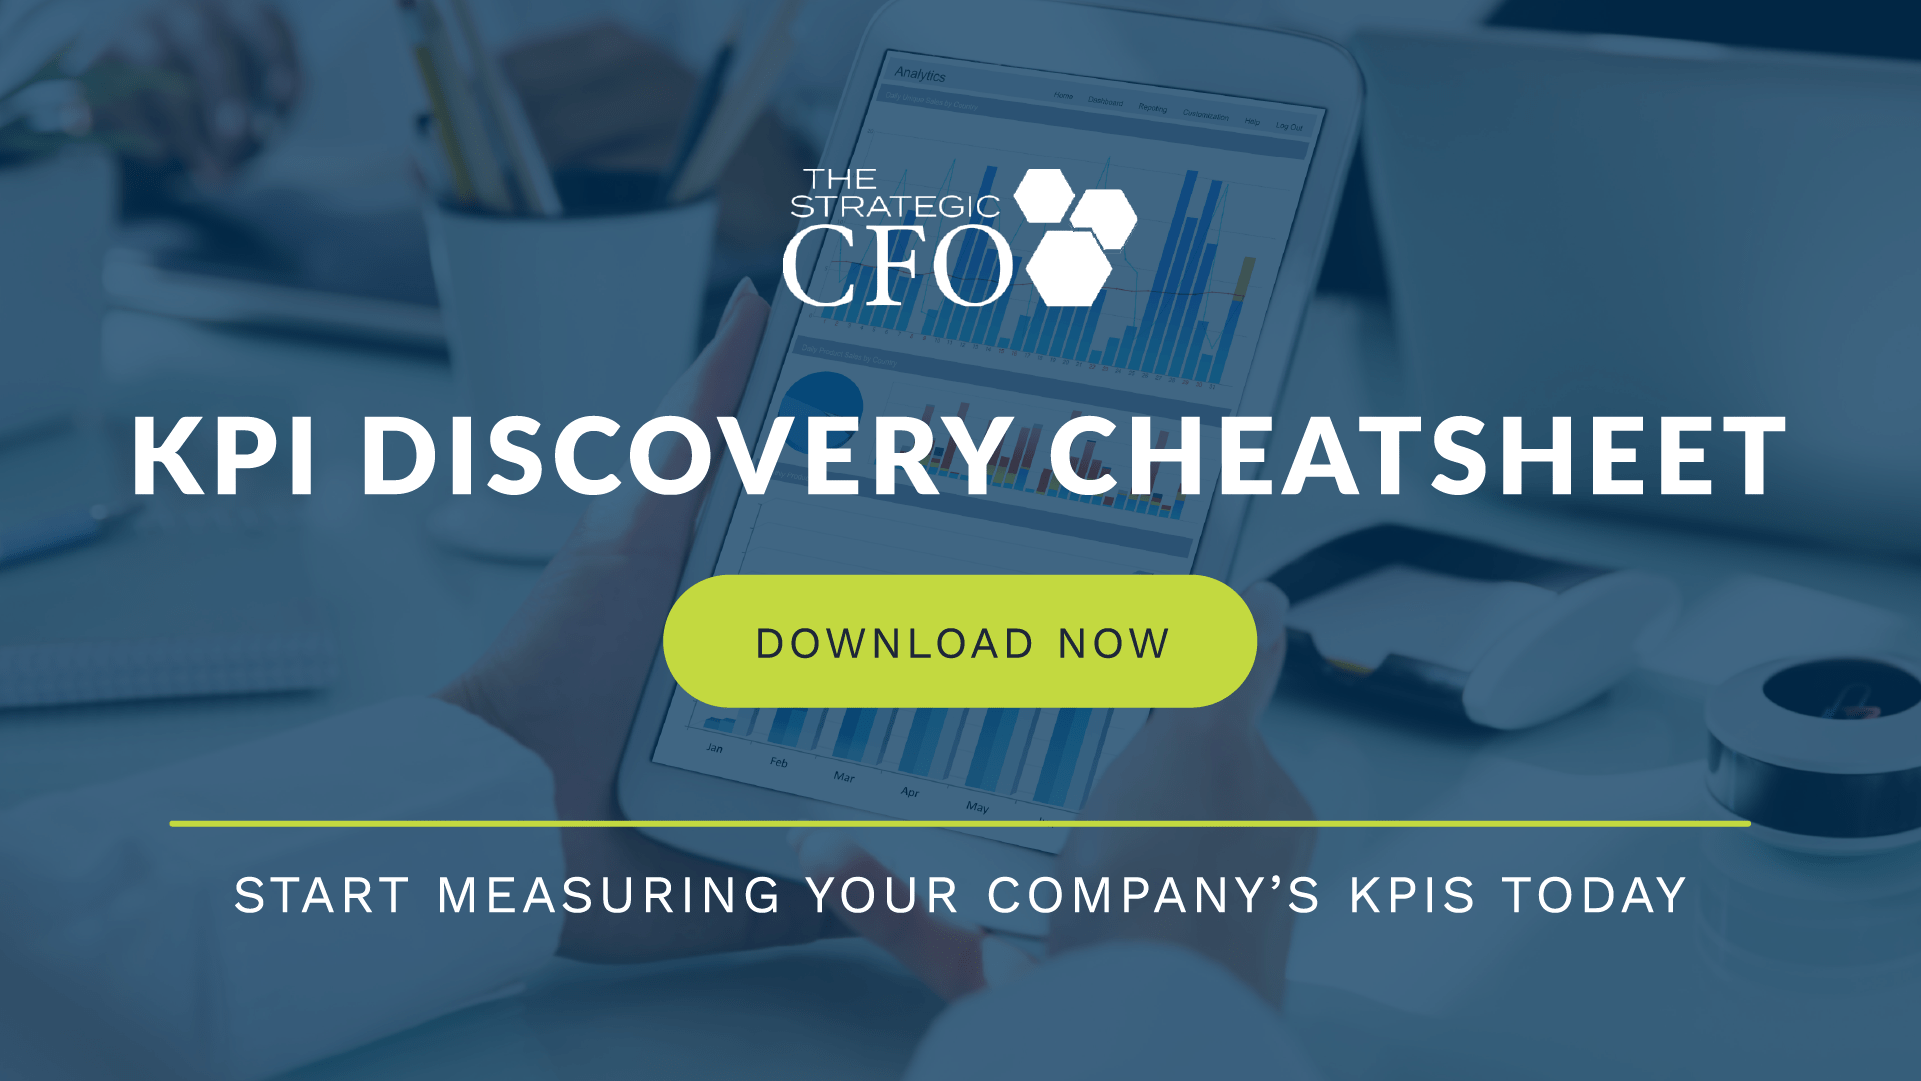 Why KPIs Are Important